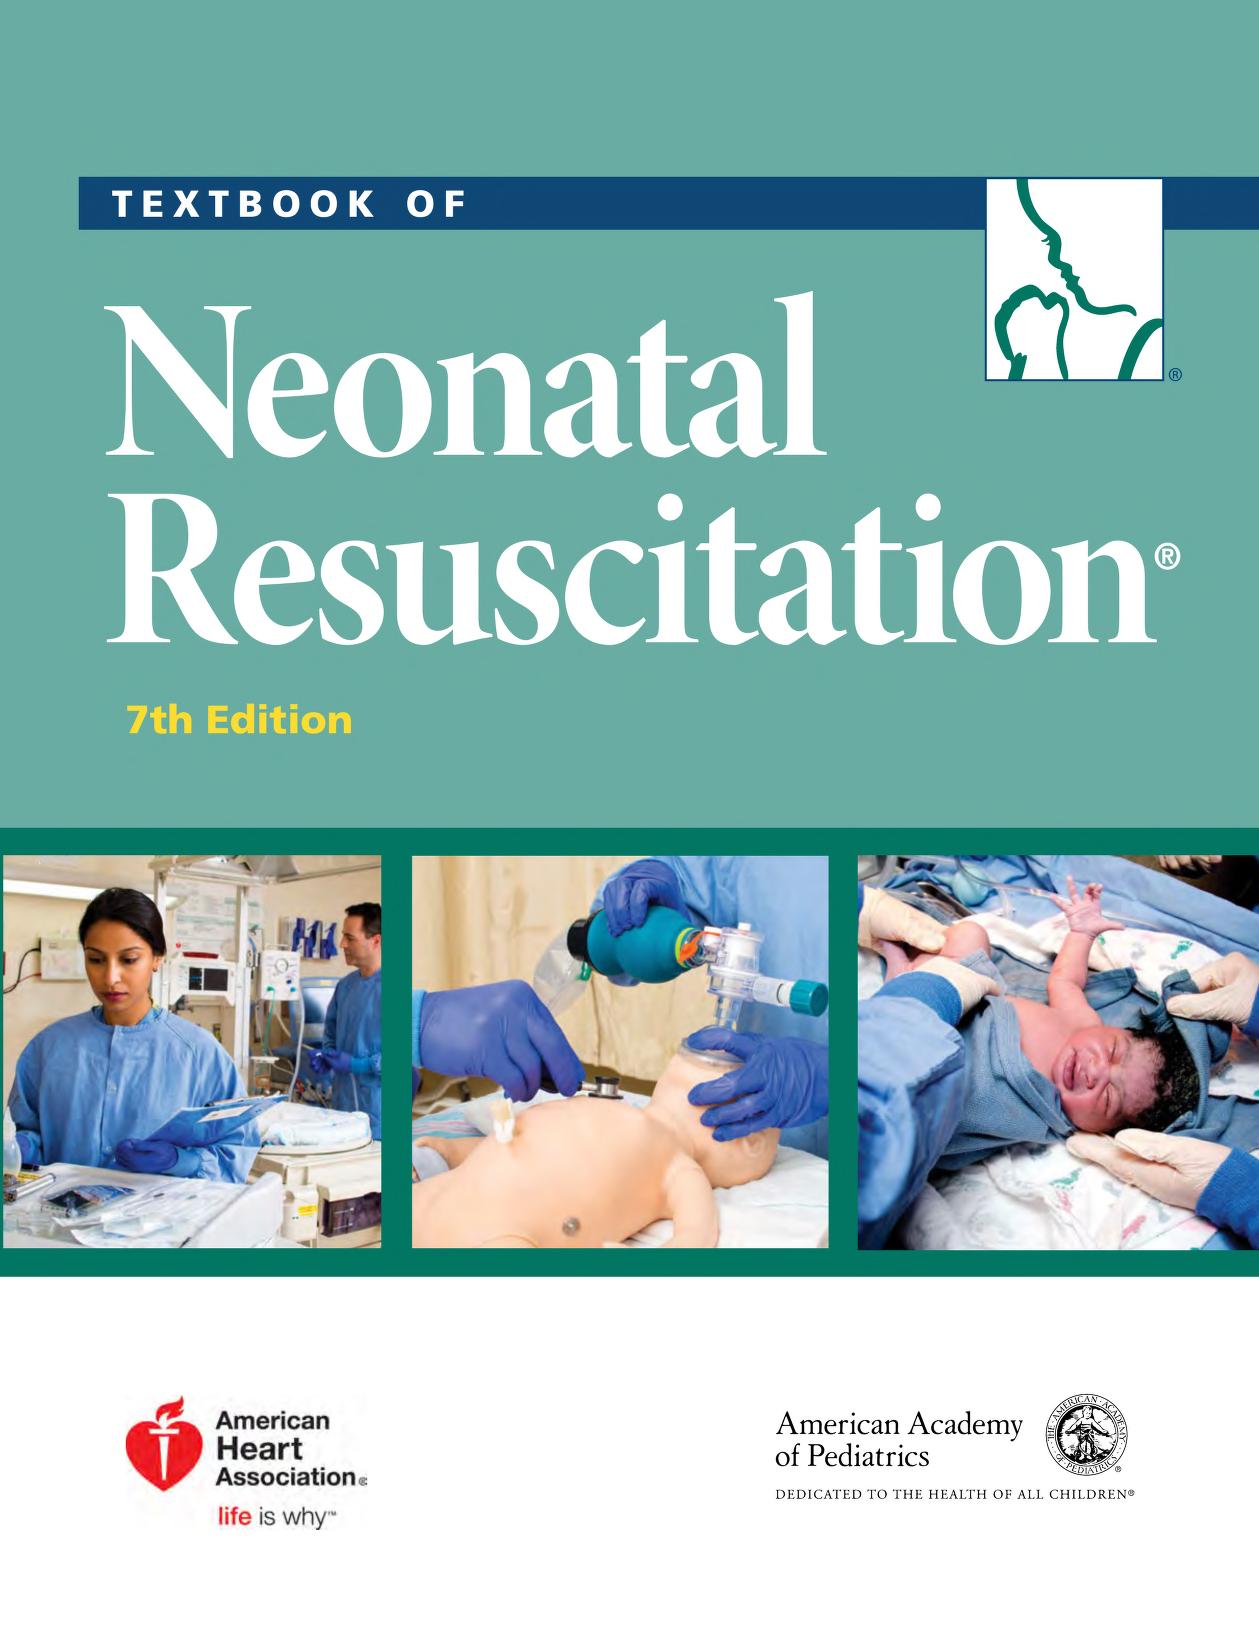 Textbook Of Neonatal Resuscitation 7th Ed, 2016 : Free Download, Borrow,  and Streaming : Internet Archive